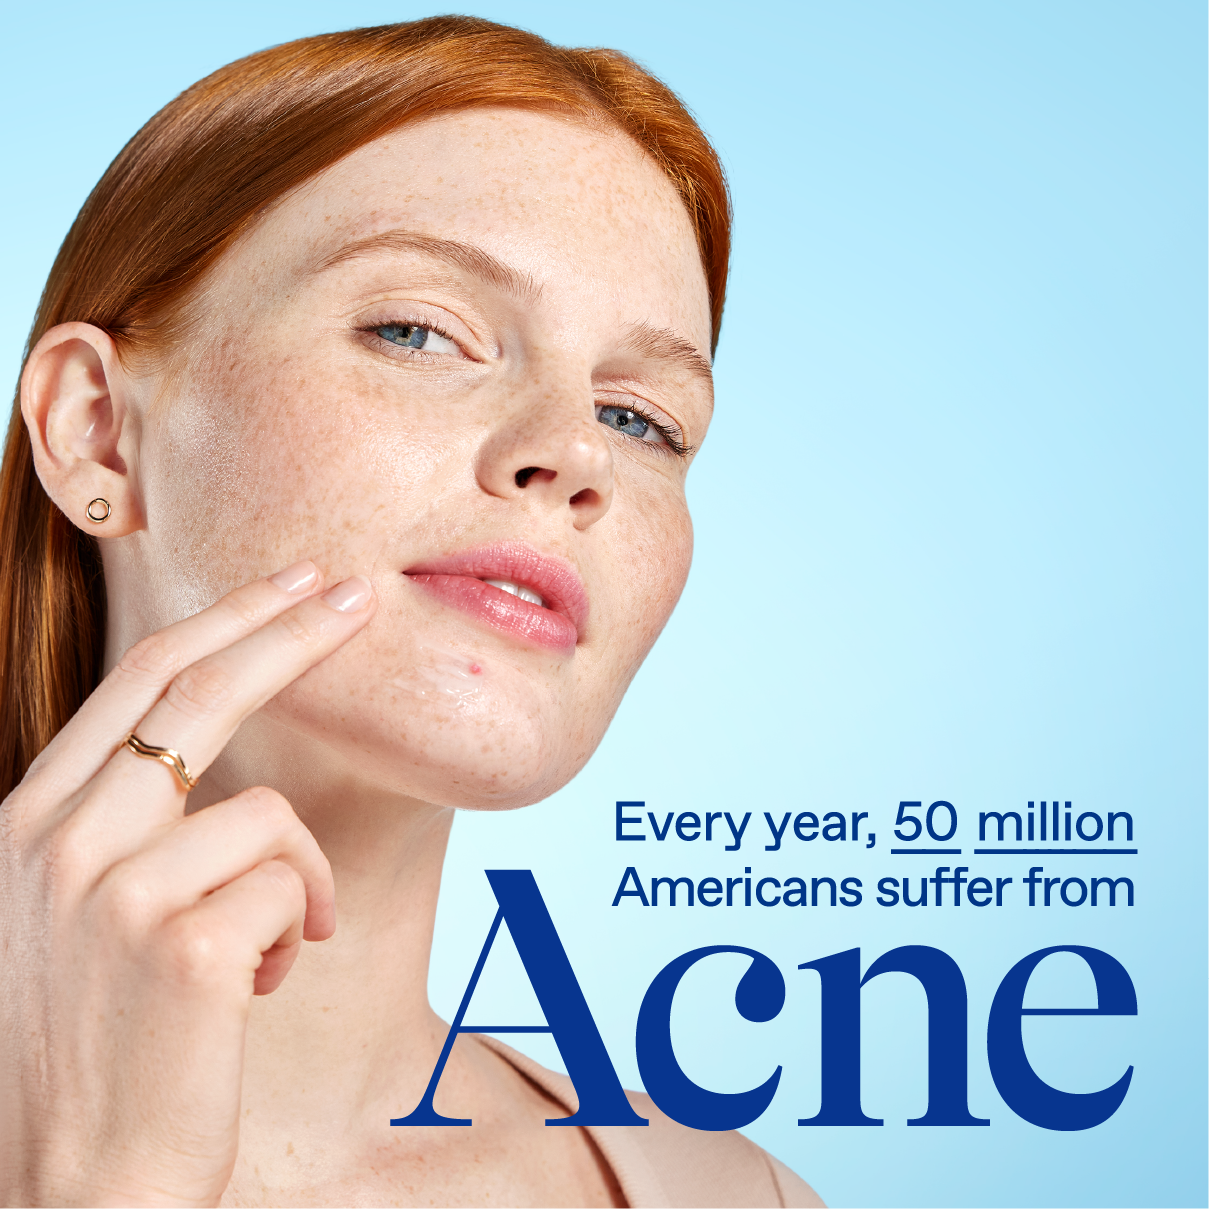 50 million Americans suffer from acne annually